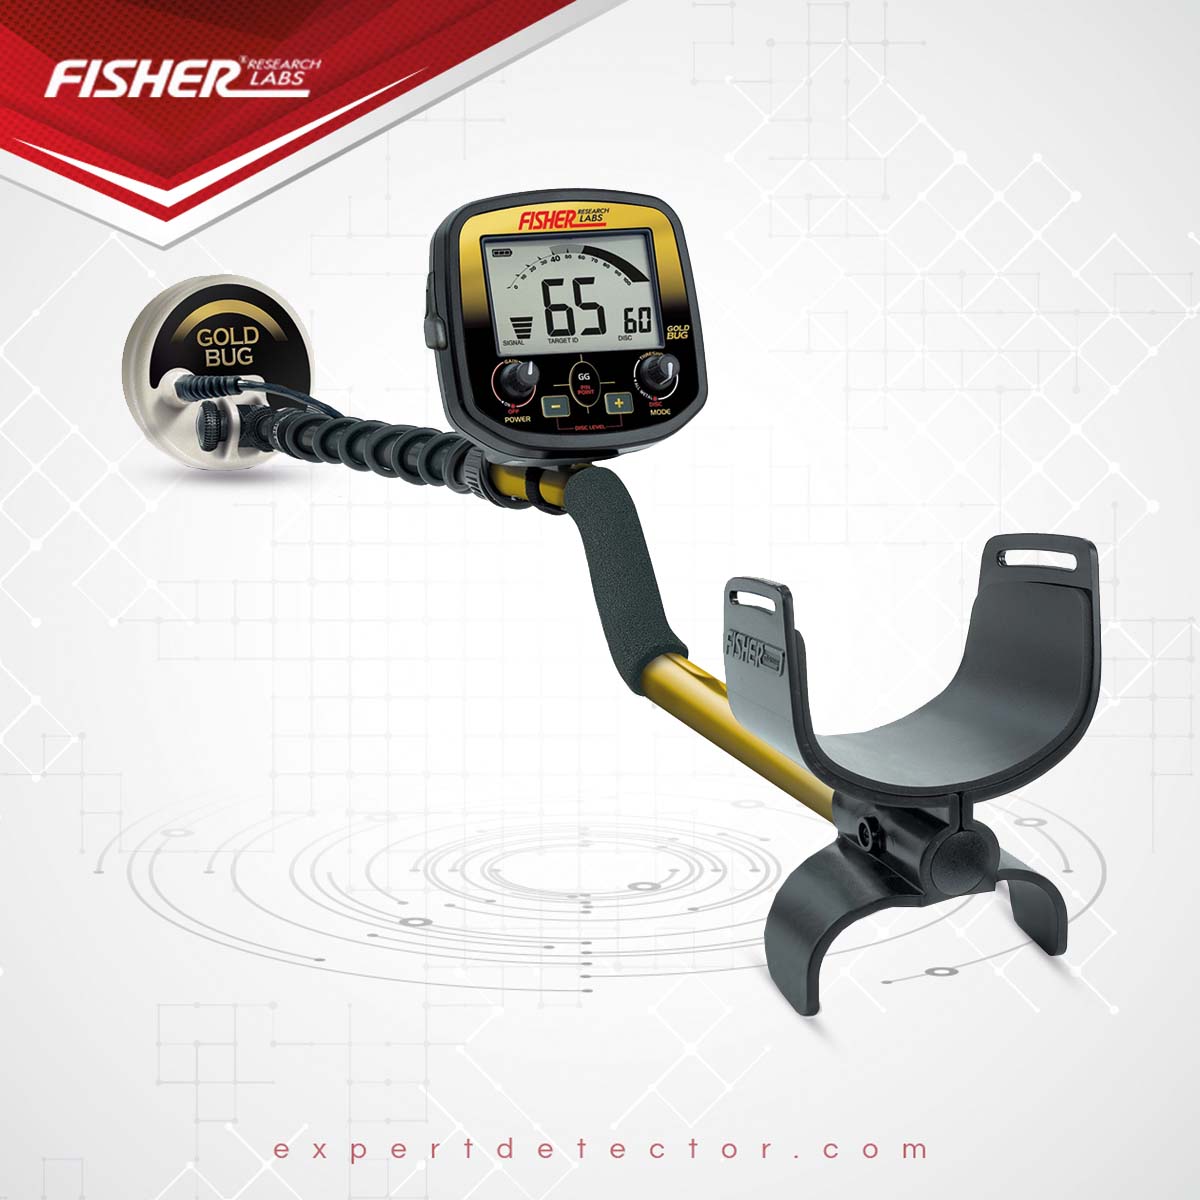 Fisher Gold Bug gold detector